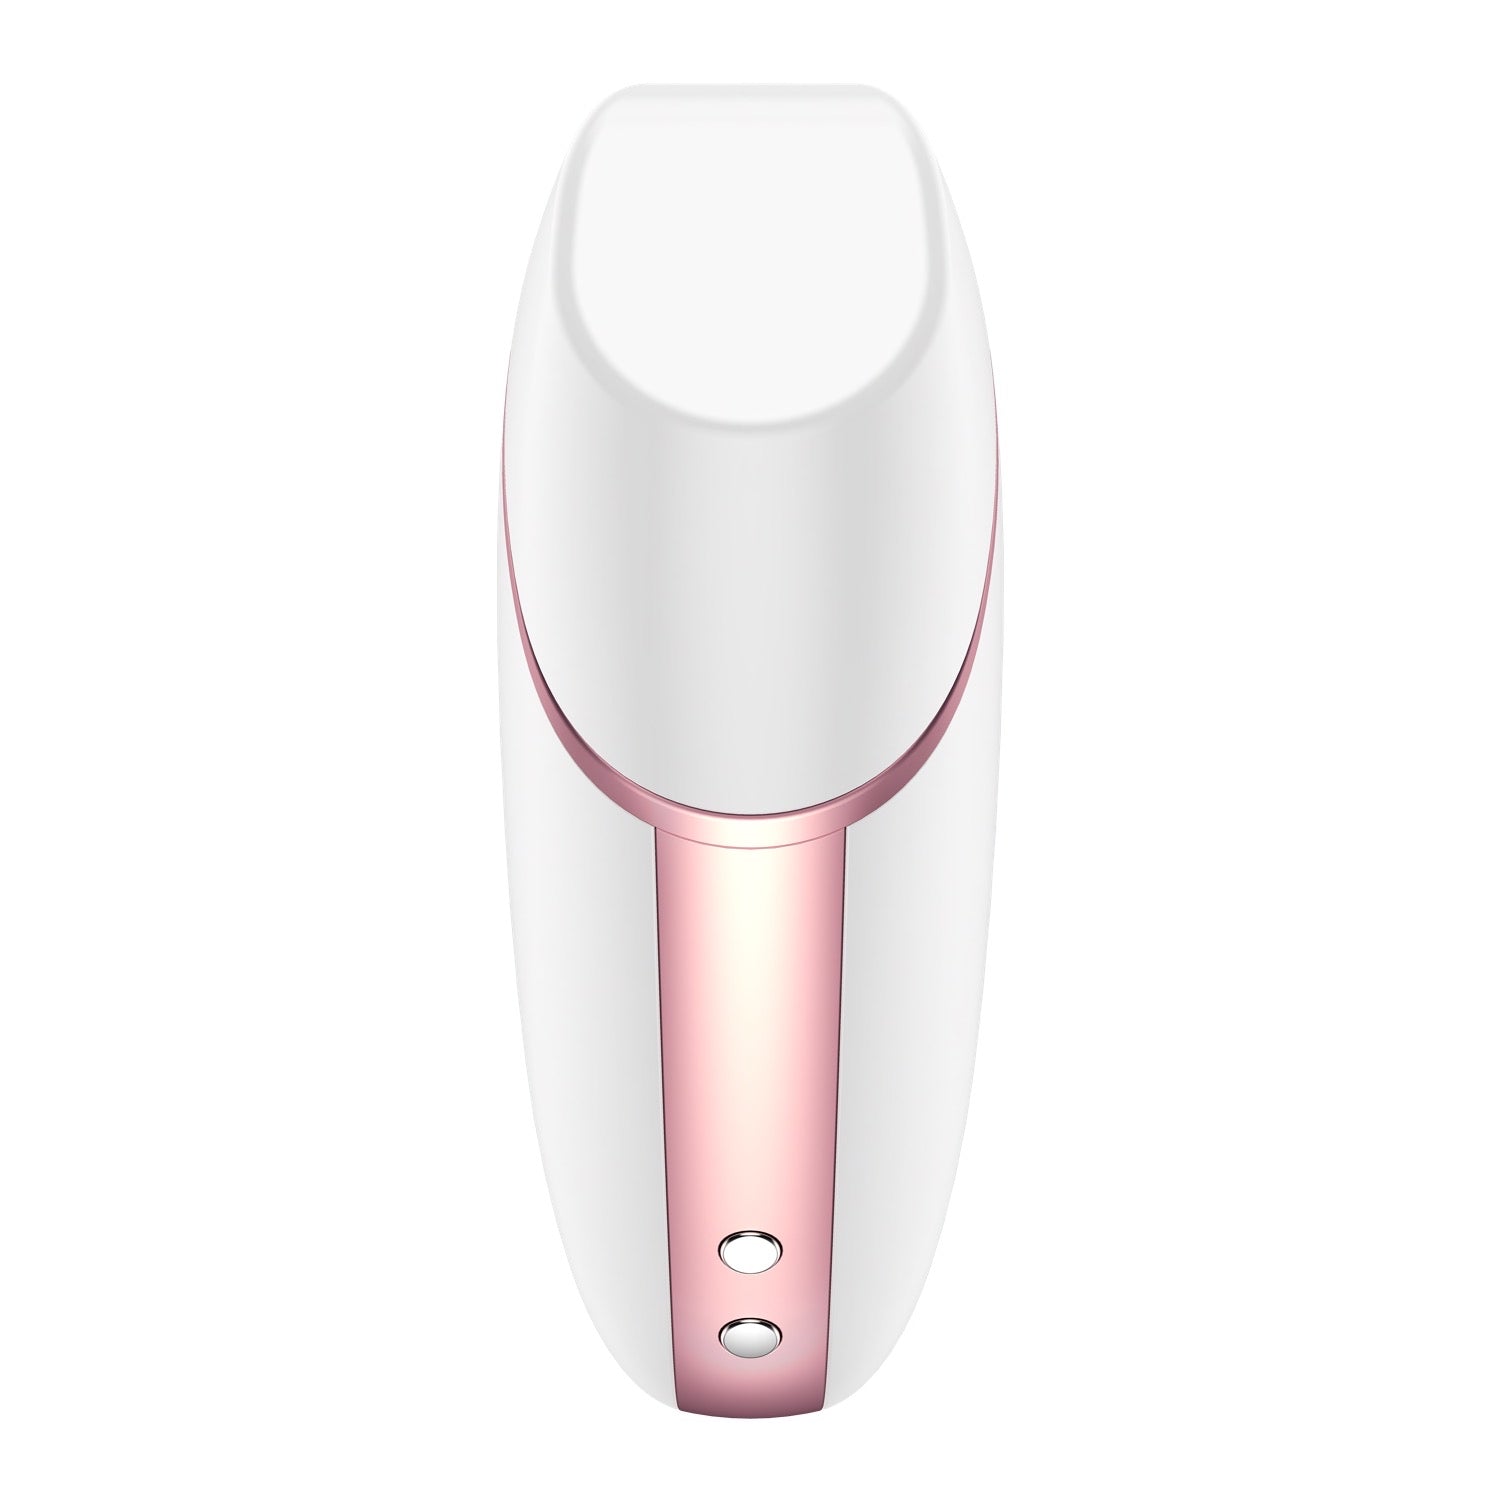 Satisfyer Love Triangle - White by Satisfyer